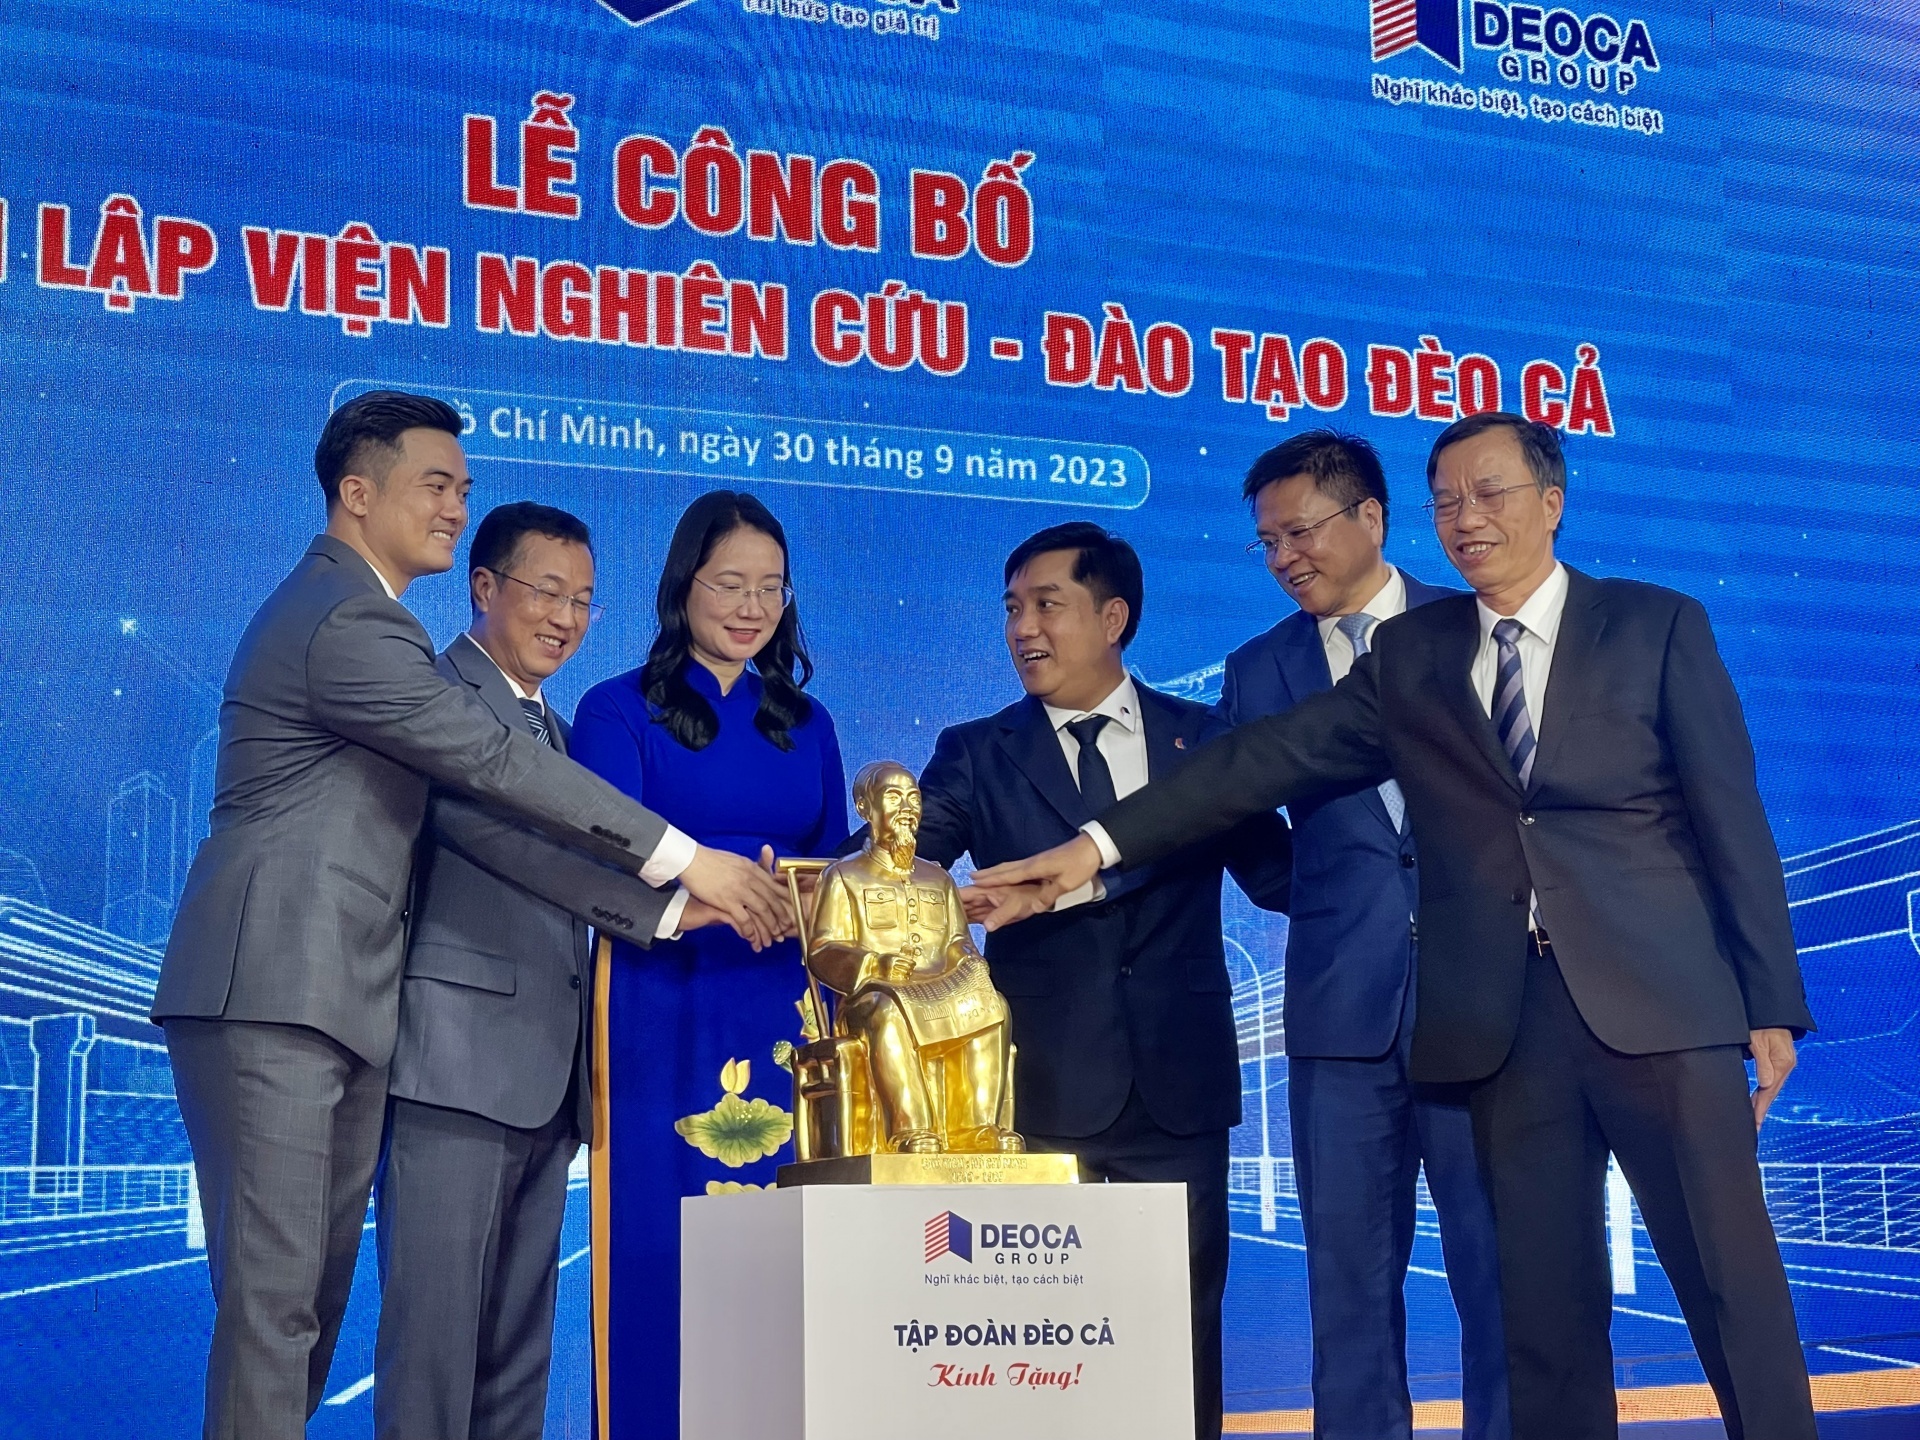 Deo Ca Research and Training Institute established in Ho Chi Minh City